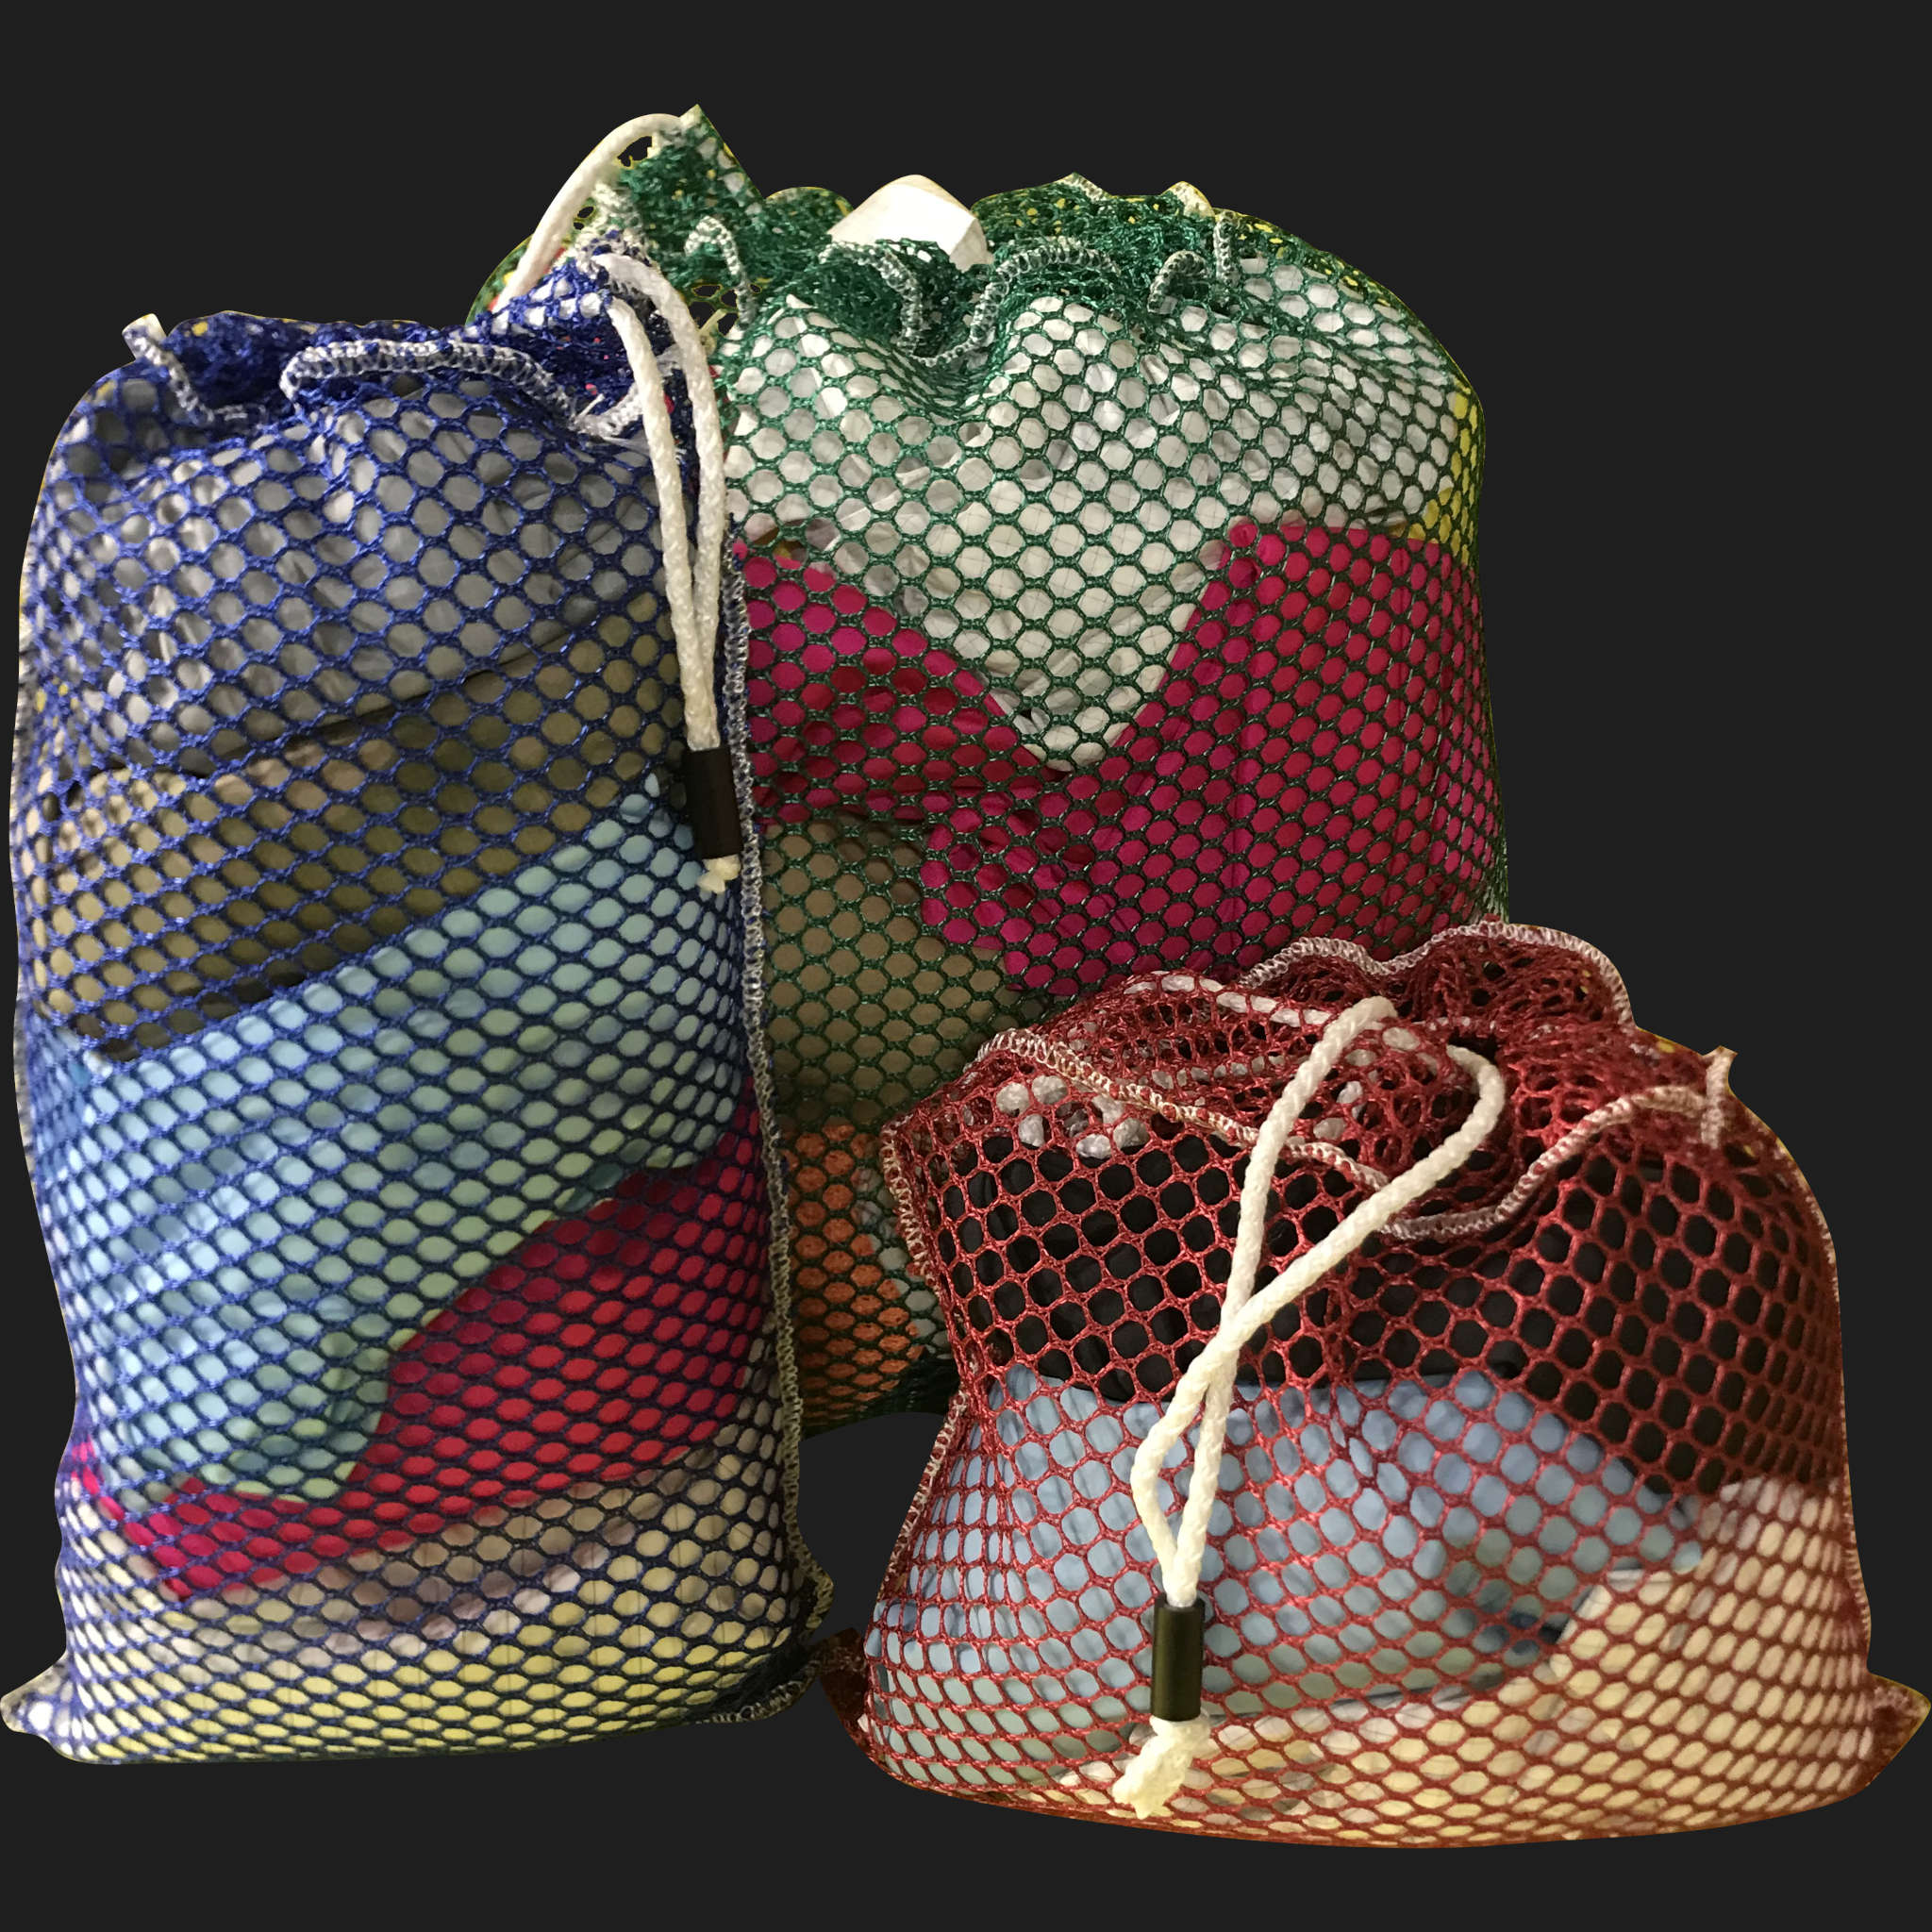 20" x 46" Customized Mesh-Net-Laundry Bags Heavy Duty with Cord and barrellock closure